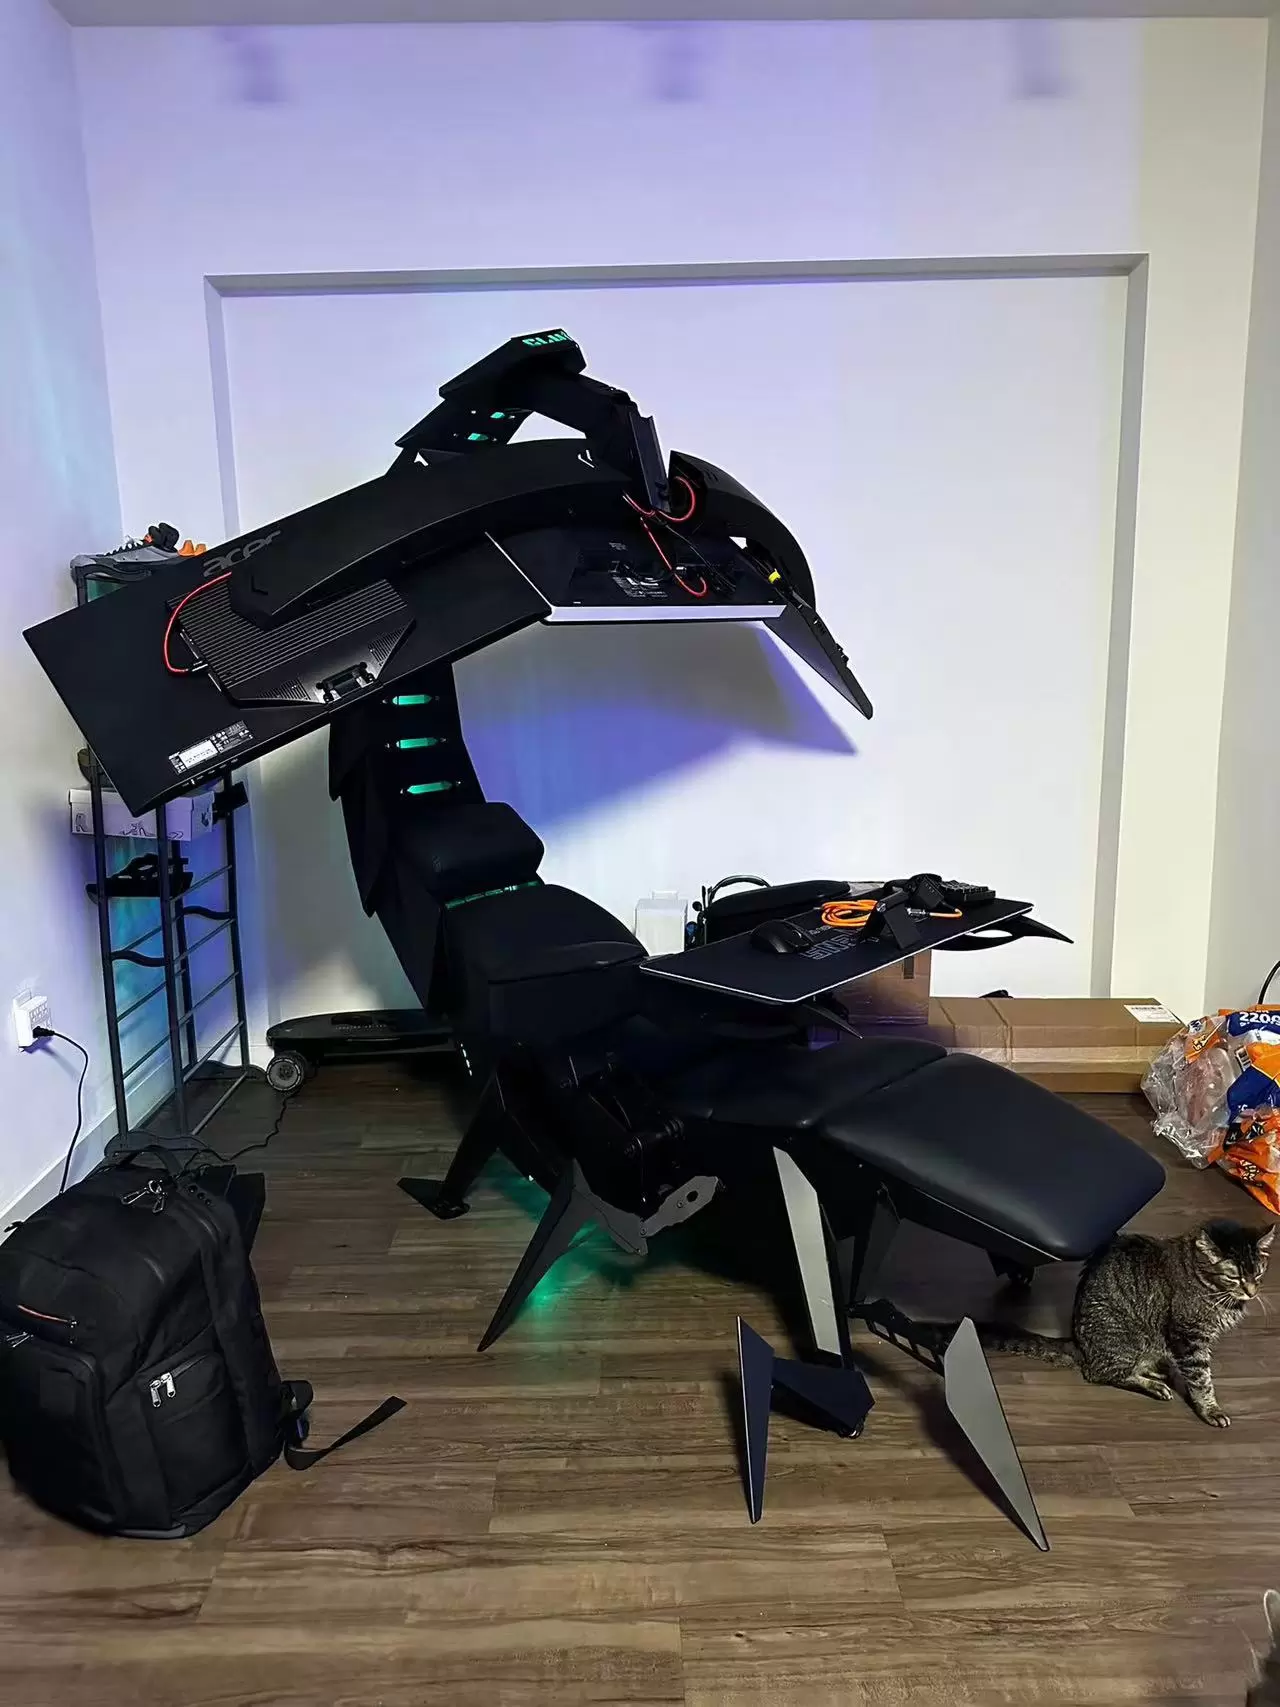 CLUVENS SK Scorpion gaming chair cockpit computer workstation support upto 5 monitors electrical recline zero gravity to flat ergonomic design super cool design